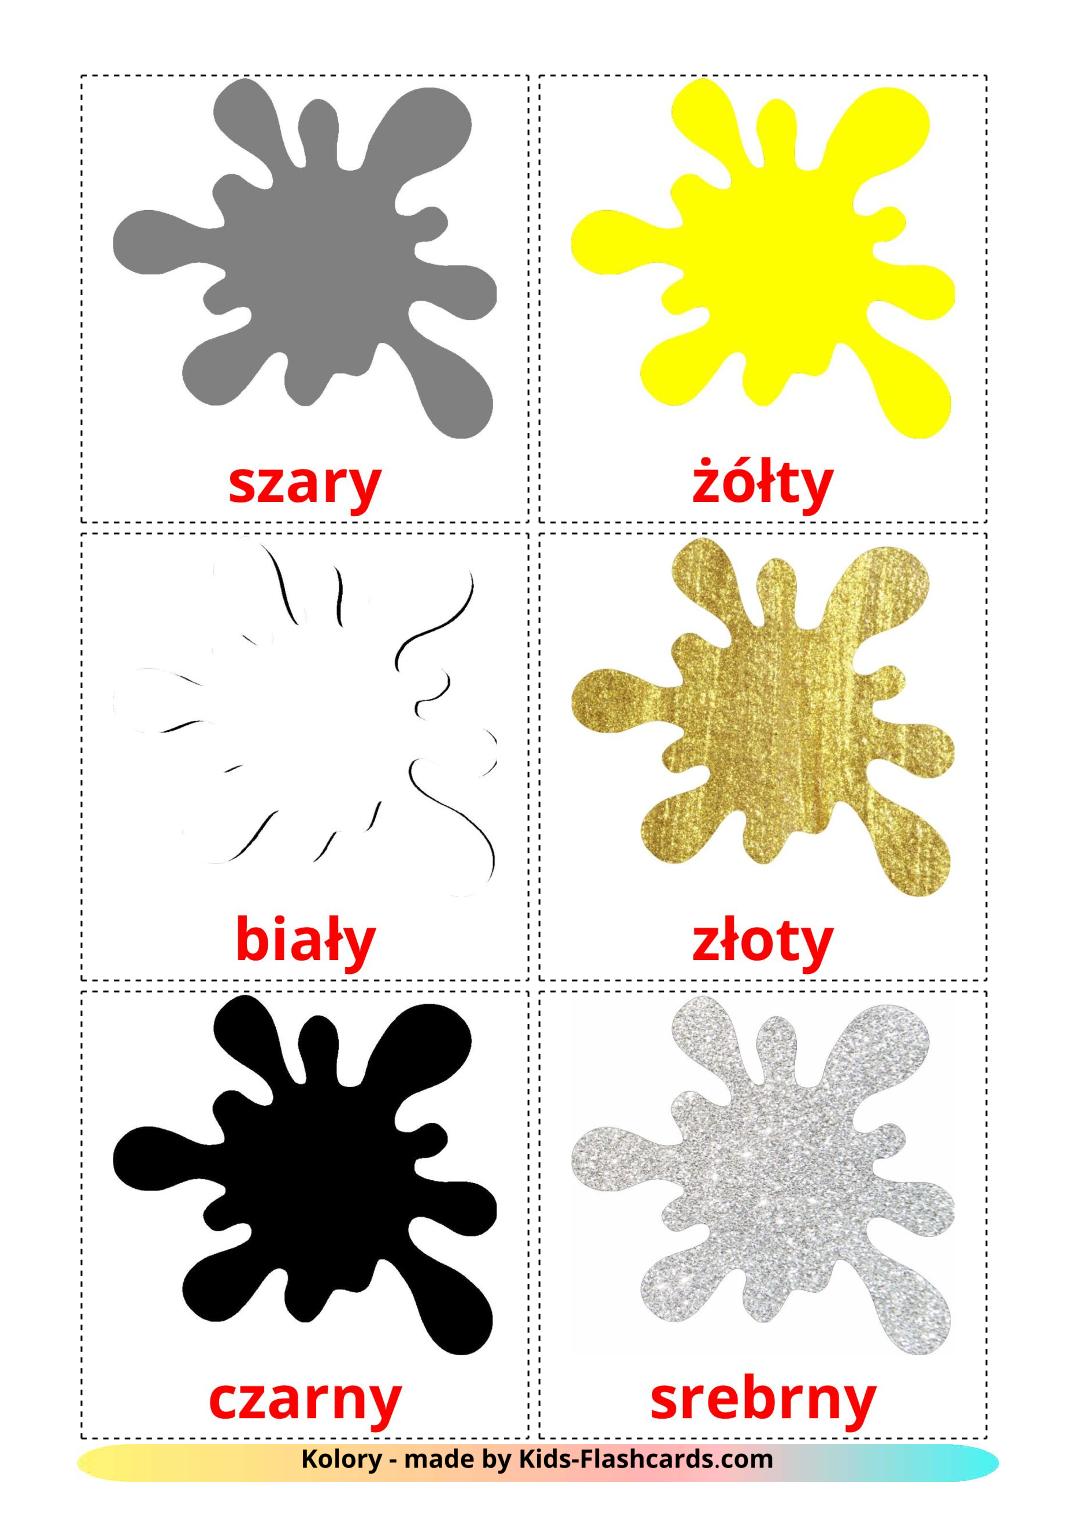 12 Free Base colors Flashcards in polish (PDF files)